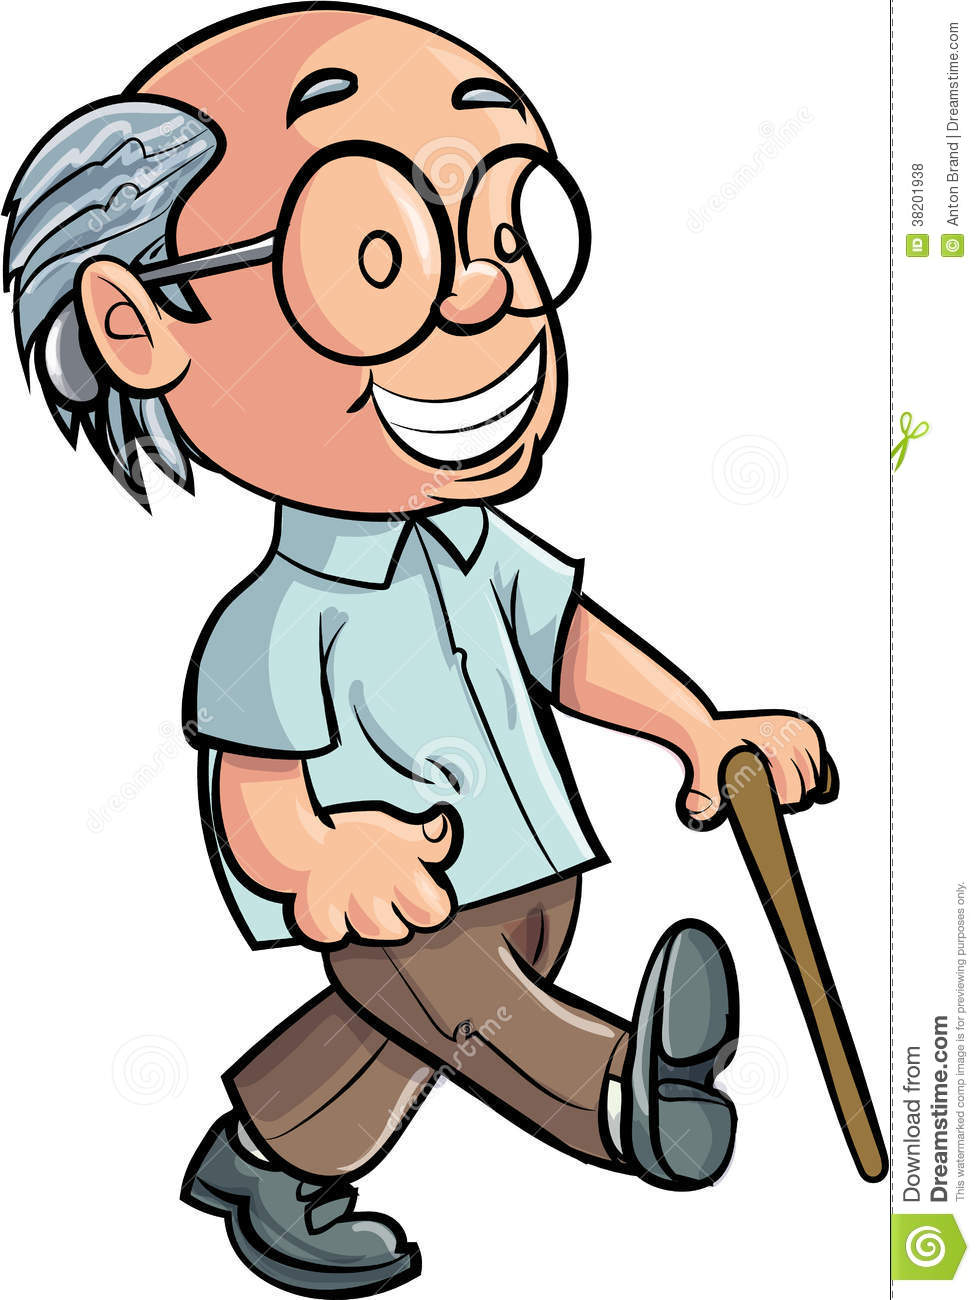 Cartoon Grandfather Walking With A Stick Royalty Free Stock Photos    